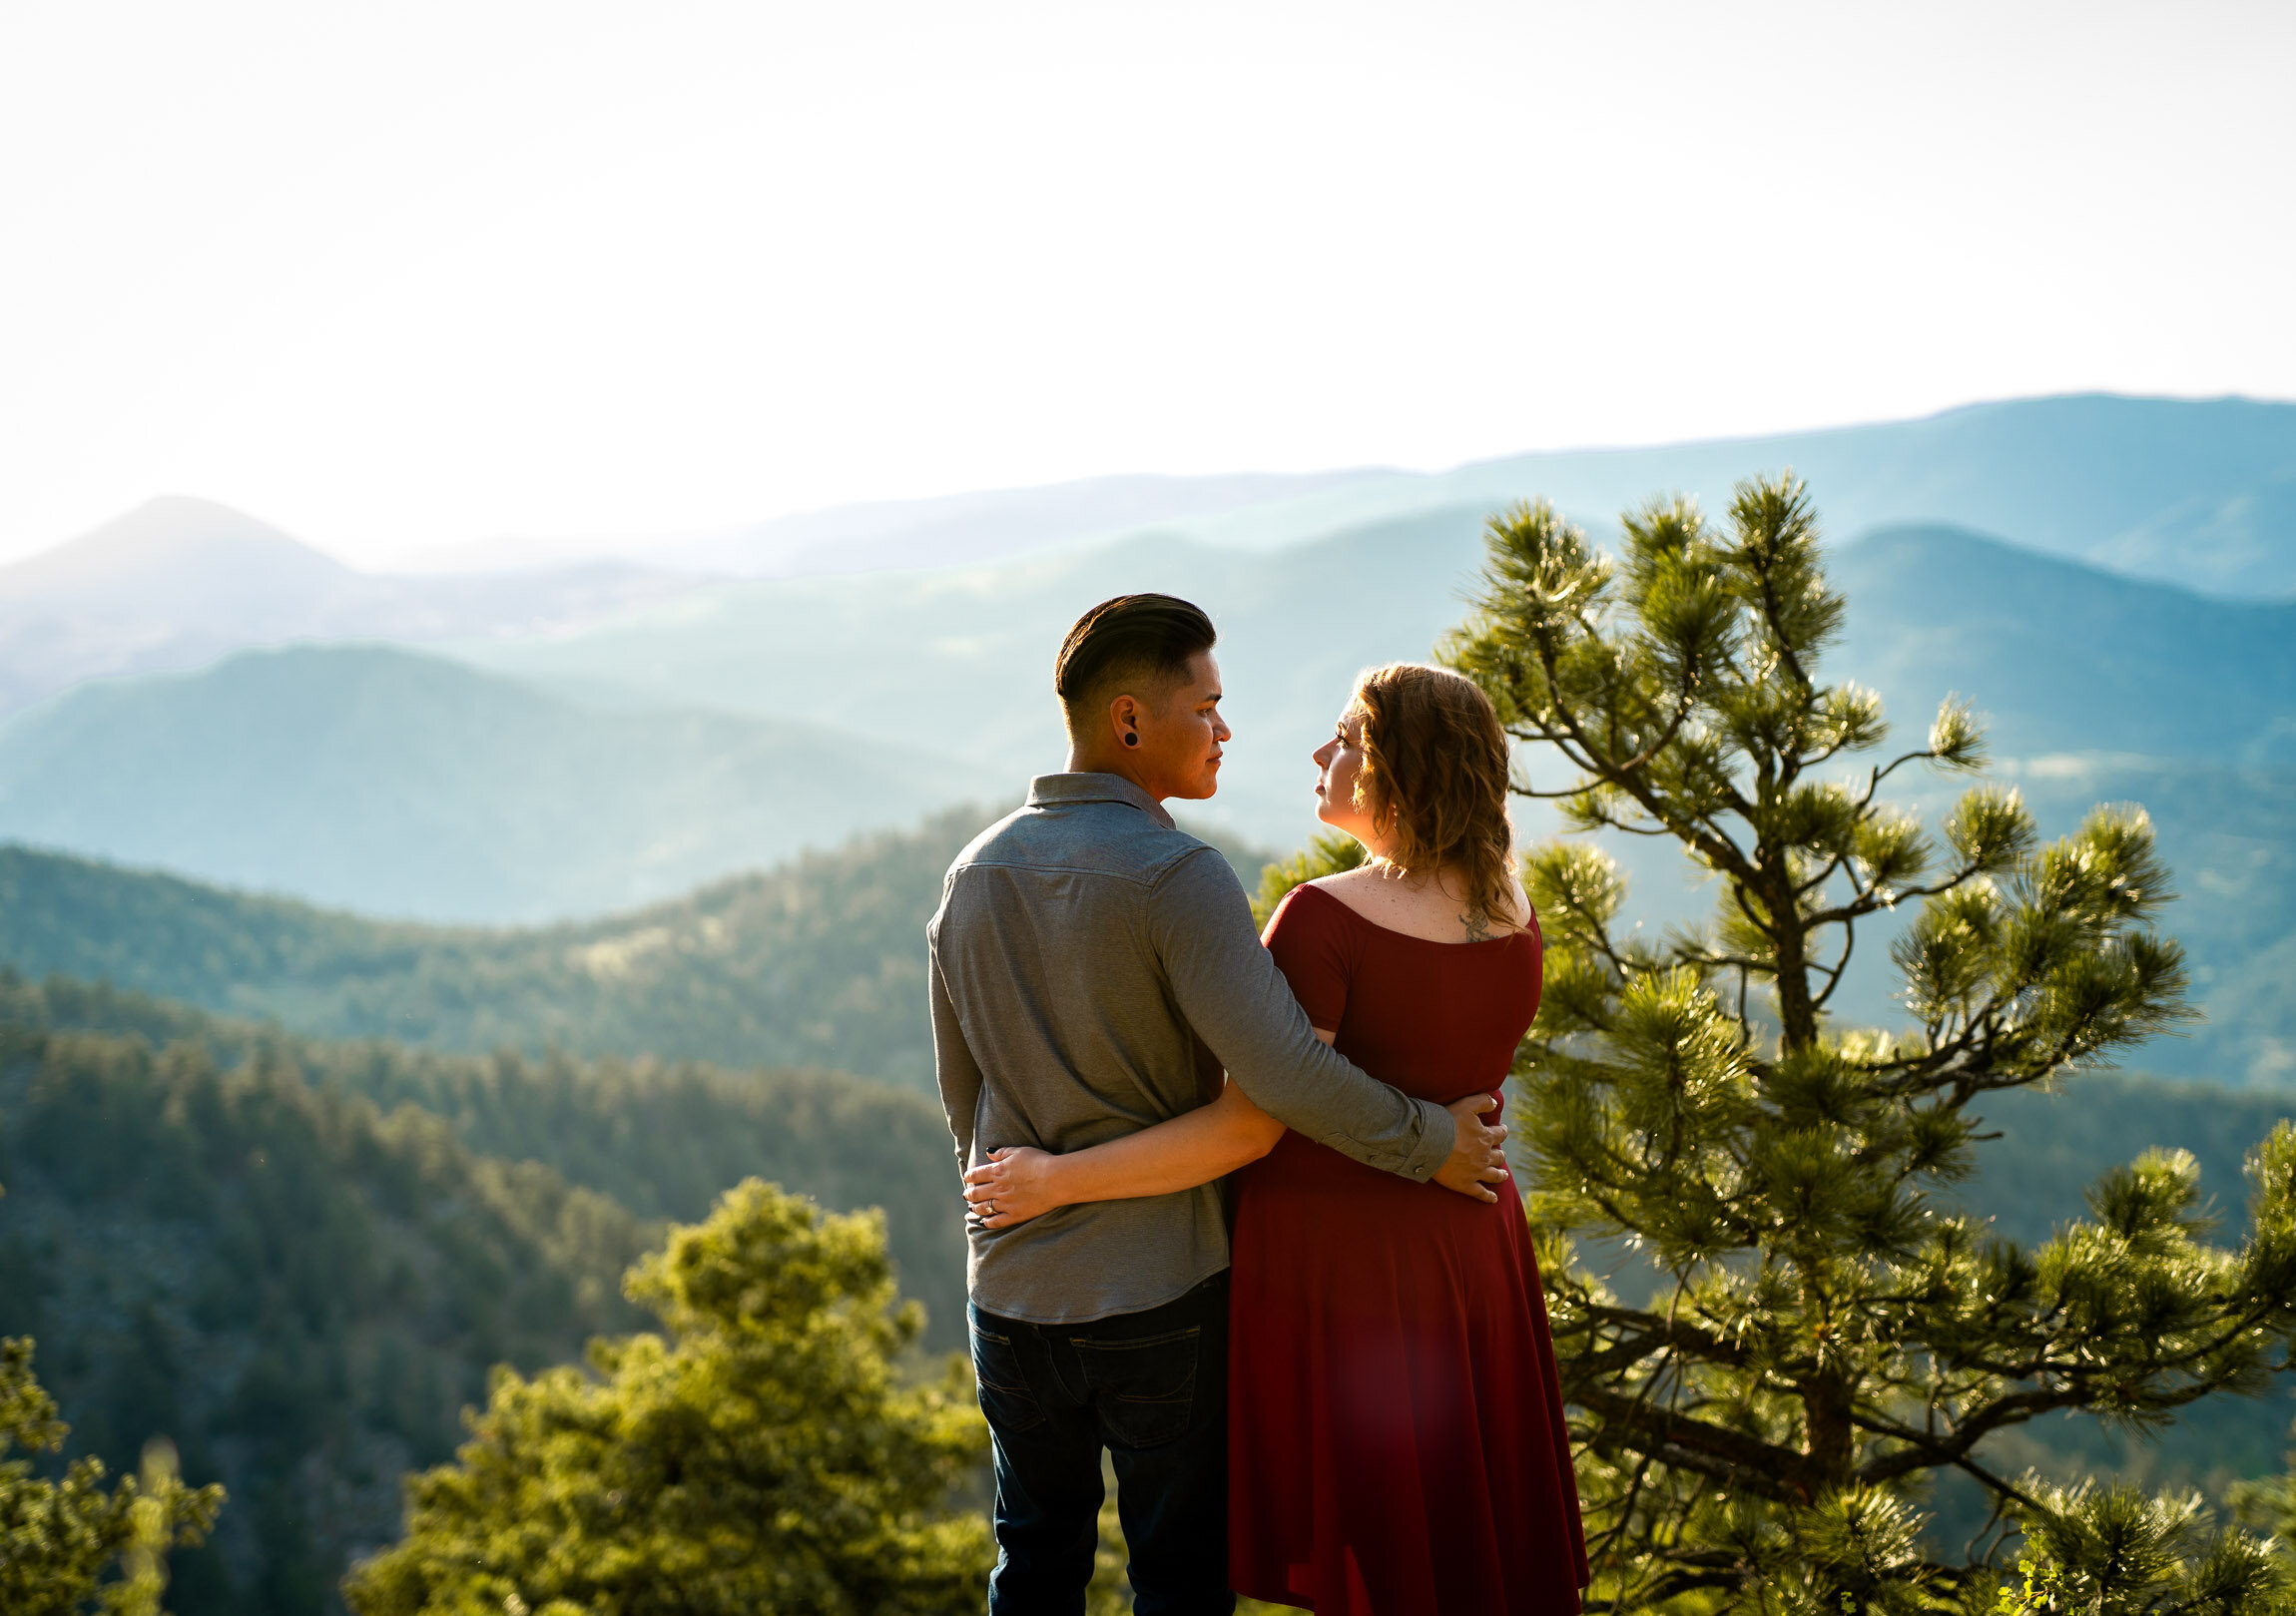 Engaged couple pose for a portrait in front of the rocky mountains during golden hour, Engagement Session, Engagement Photos, Engagement Photos Inspiration, Engagement Photography, Engagement Photographer, Summer Engagement Photos, Mountain Engagement Photos, Lost Gulch Overlook engagement session, Lost Gulch Overlook engagement photos, Lost Gulch Overlook engagement photography, Lost Gulch Overlook engagement photographer, Lost Gulch Overlook  engagement inspiration, Boulder engagement session, Boulder engagement photos, Boulder engagement photography, Boulder engagement photographer, Boulder engagement inspiration, Colorado engagement session, Colorado engagement photos, Colorado engagement photography, Colorado engagement photographer, Colorado engagement inspiration